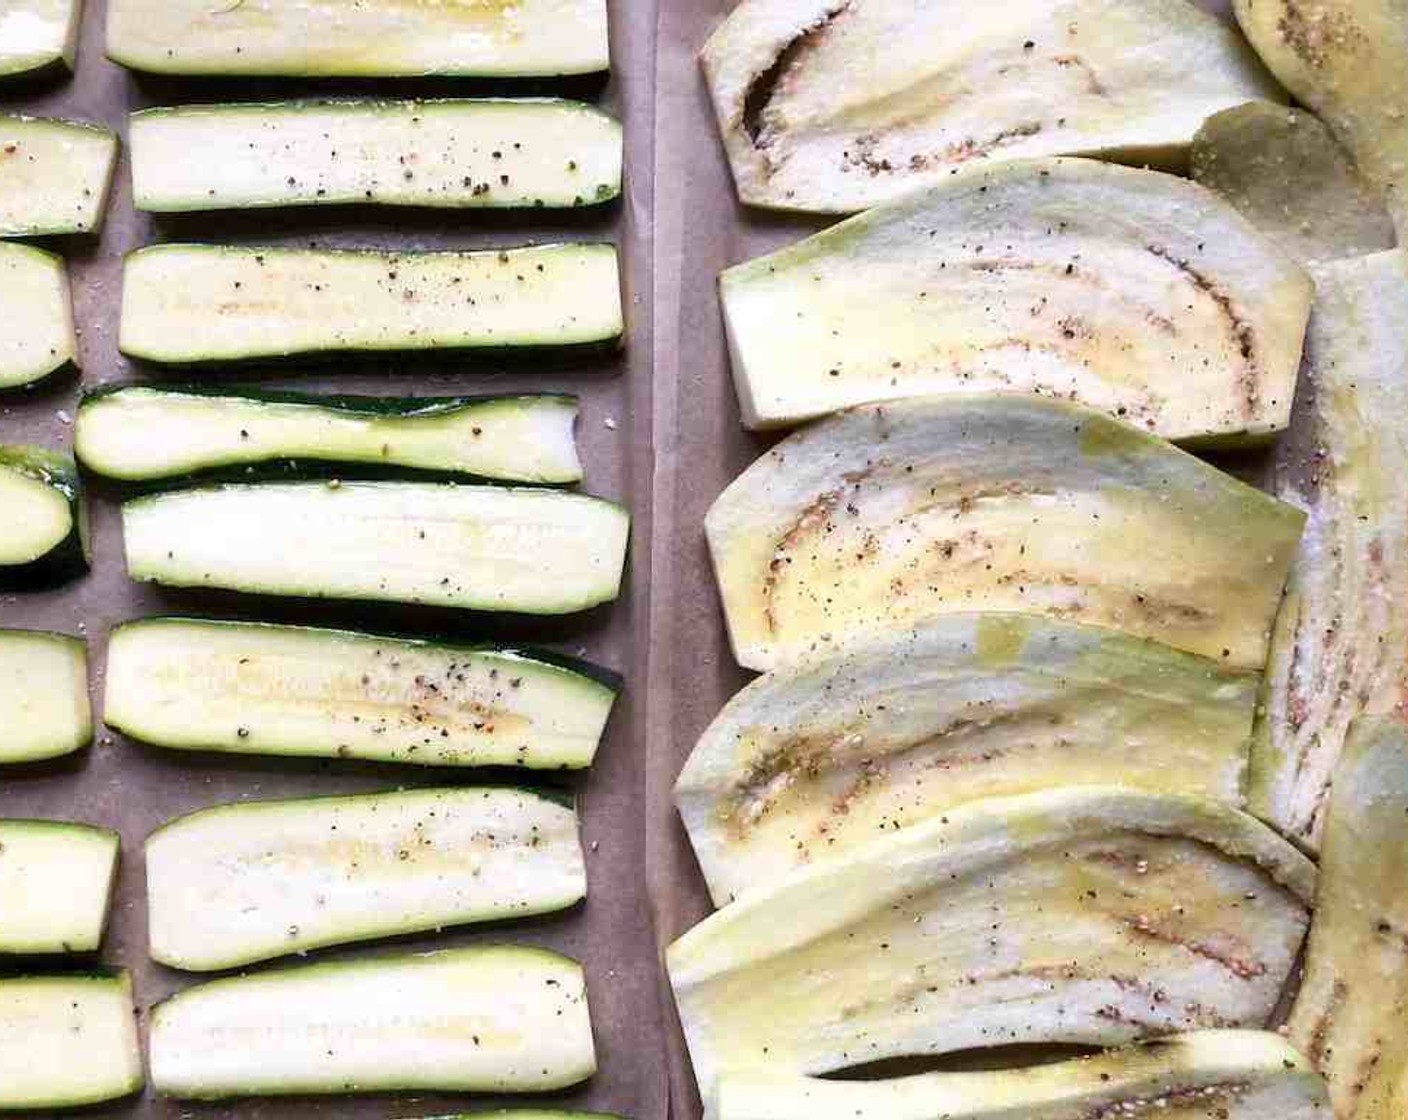 step 5 Arrange the Eggplants (2) and Zucchini (3) on large rimmed sheet pans lined with parchment paper. Brush generously with little oil and sprinkle lightly with Salt (to taste) and Freshly Ground Black Pepper (to taste).